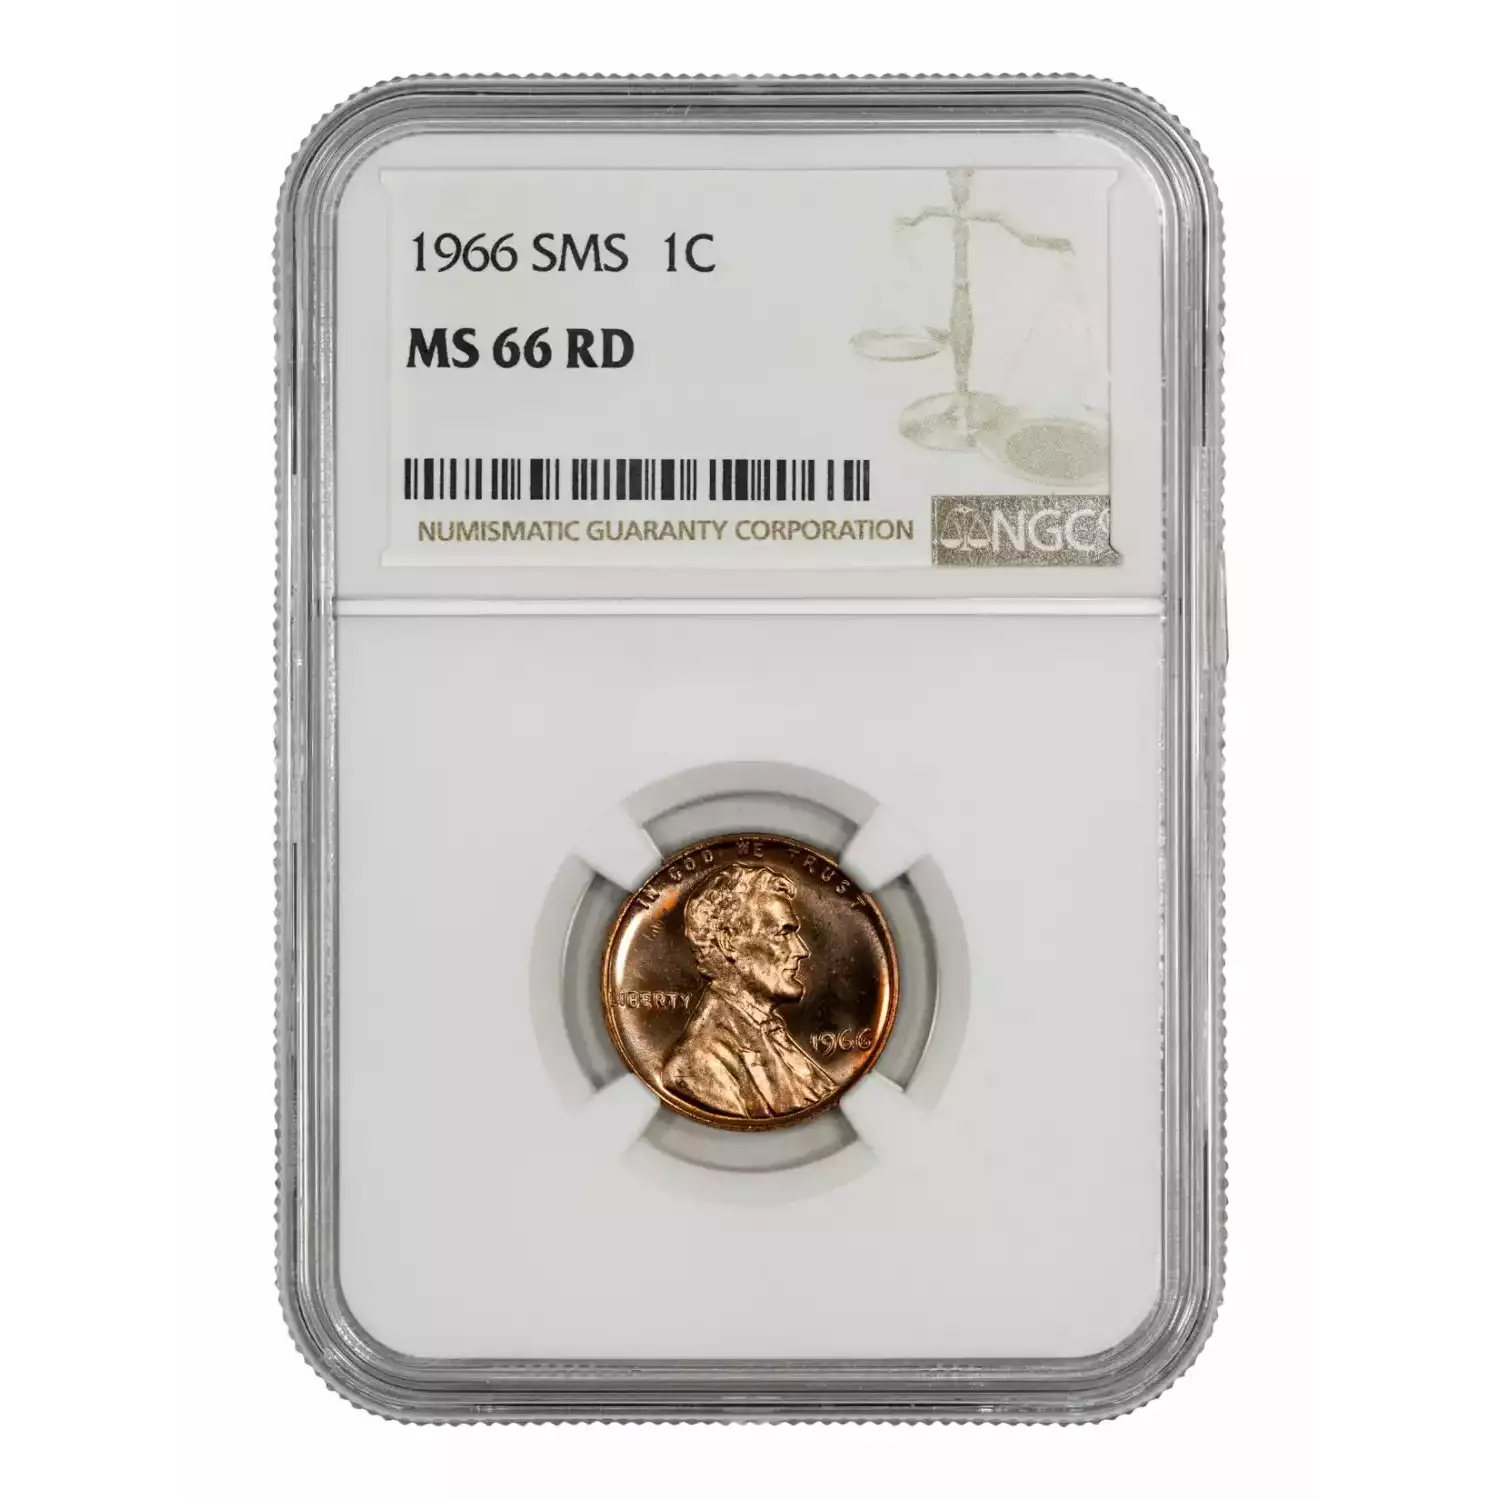 1966 SMS LINCOLN MEMORIAL CENT PENNY 1C NGC CERTIFIED MS 66 RD